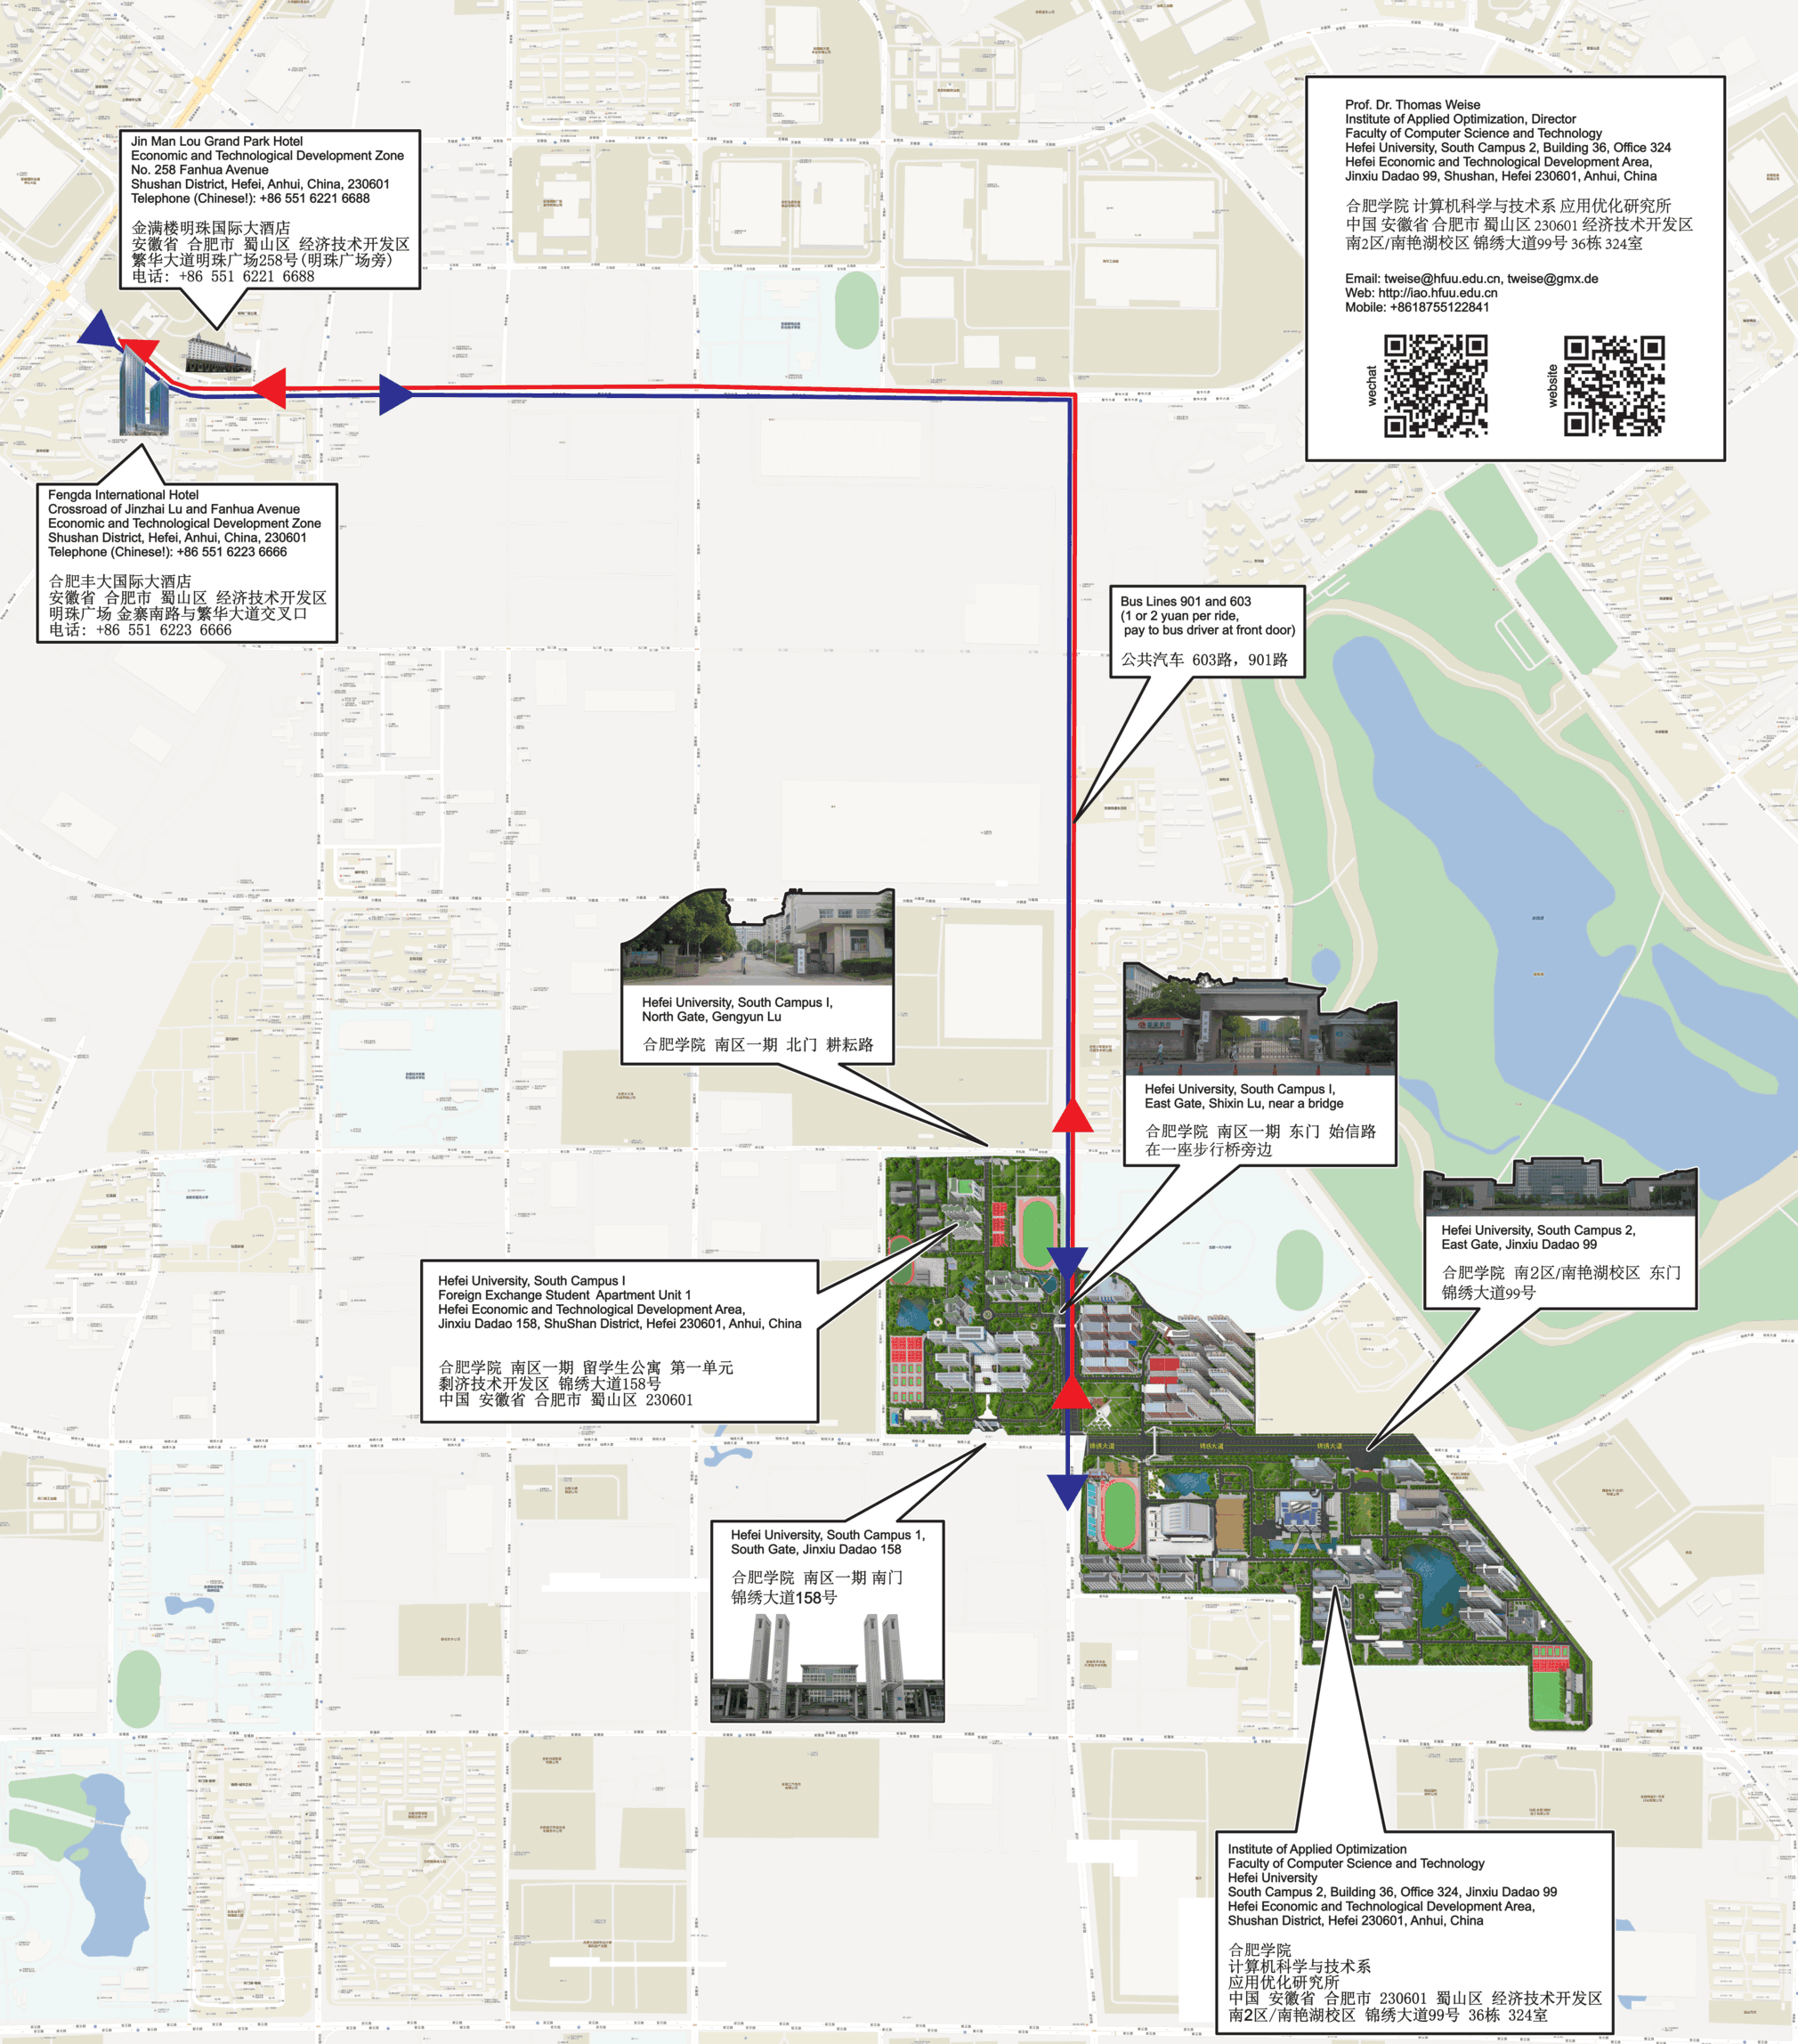 Overview map relating the locations of the two recommended hotels and our uni campus.